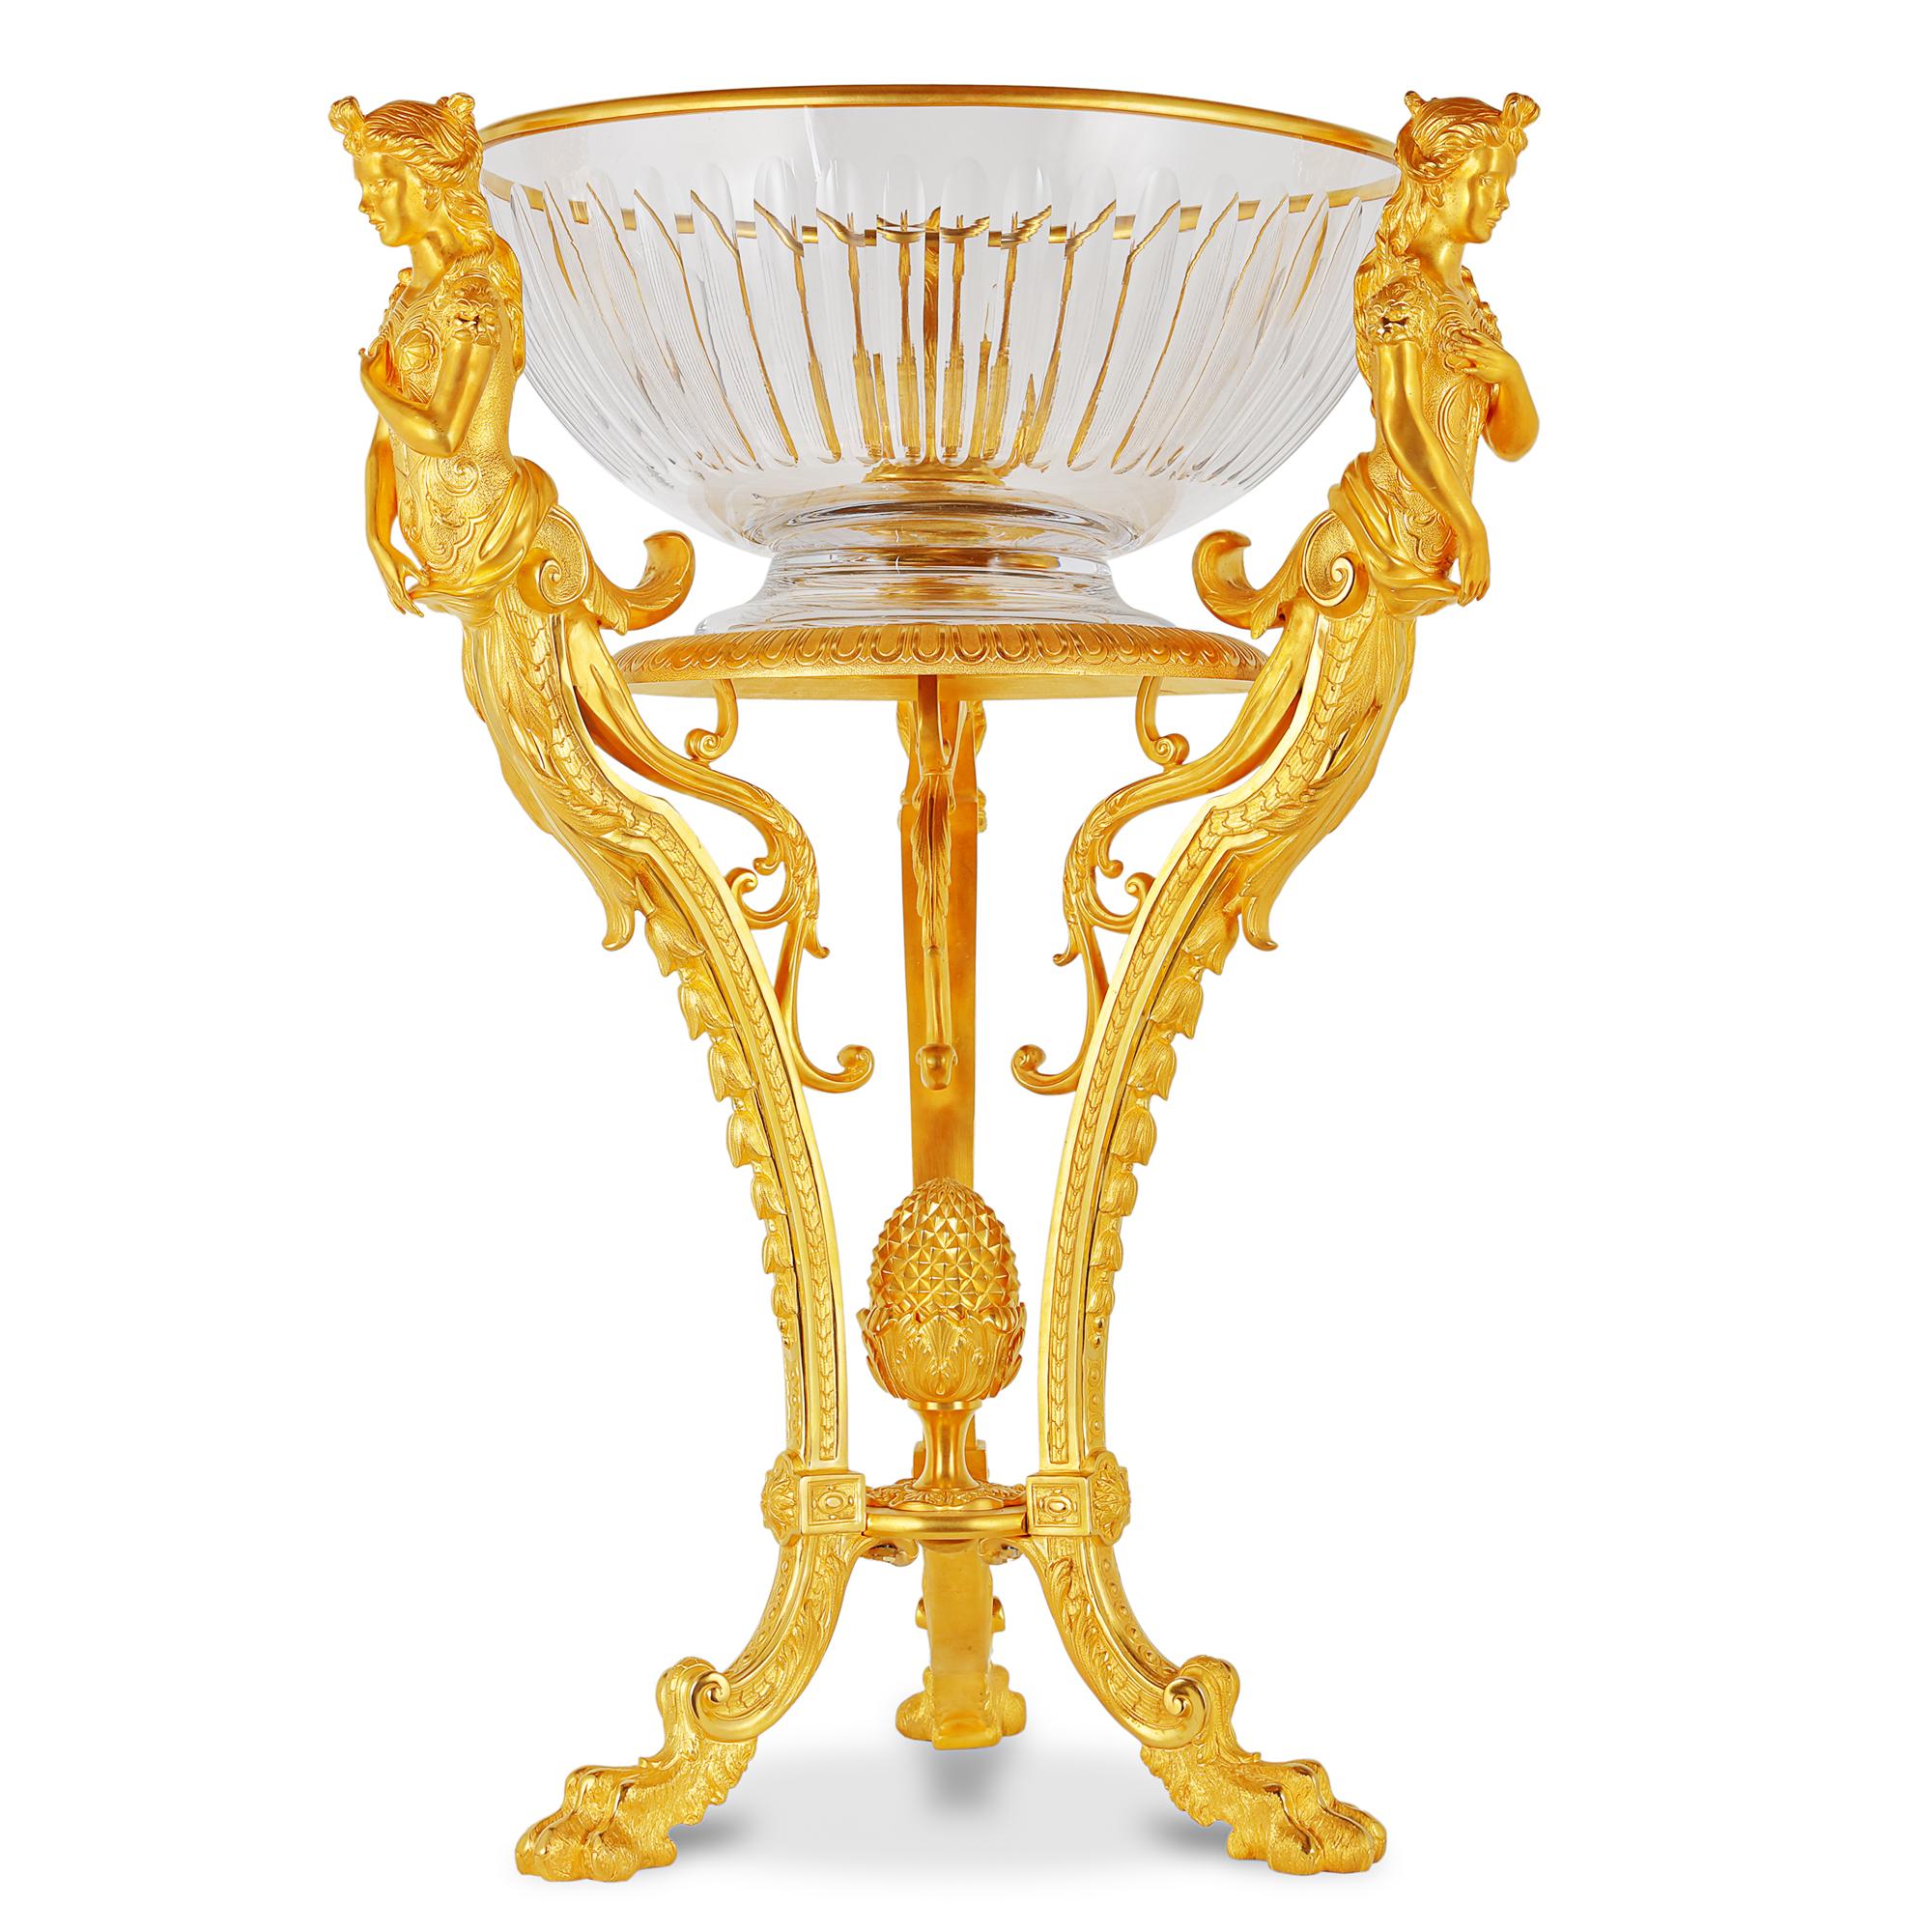 These classic pair of French Neoclassical style jardinieres are wrought from ormolu & glass. The pedestal bowl is mounted on a rounded stand which is held together at three point with ormolu maidens which extends downwards to a floral paw like base.